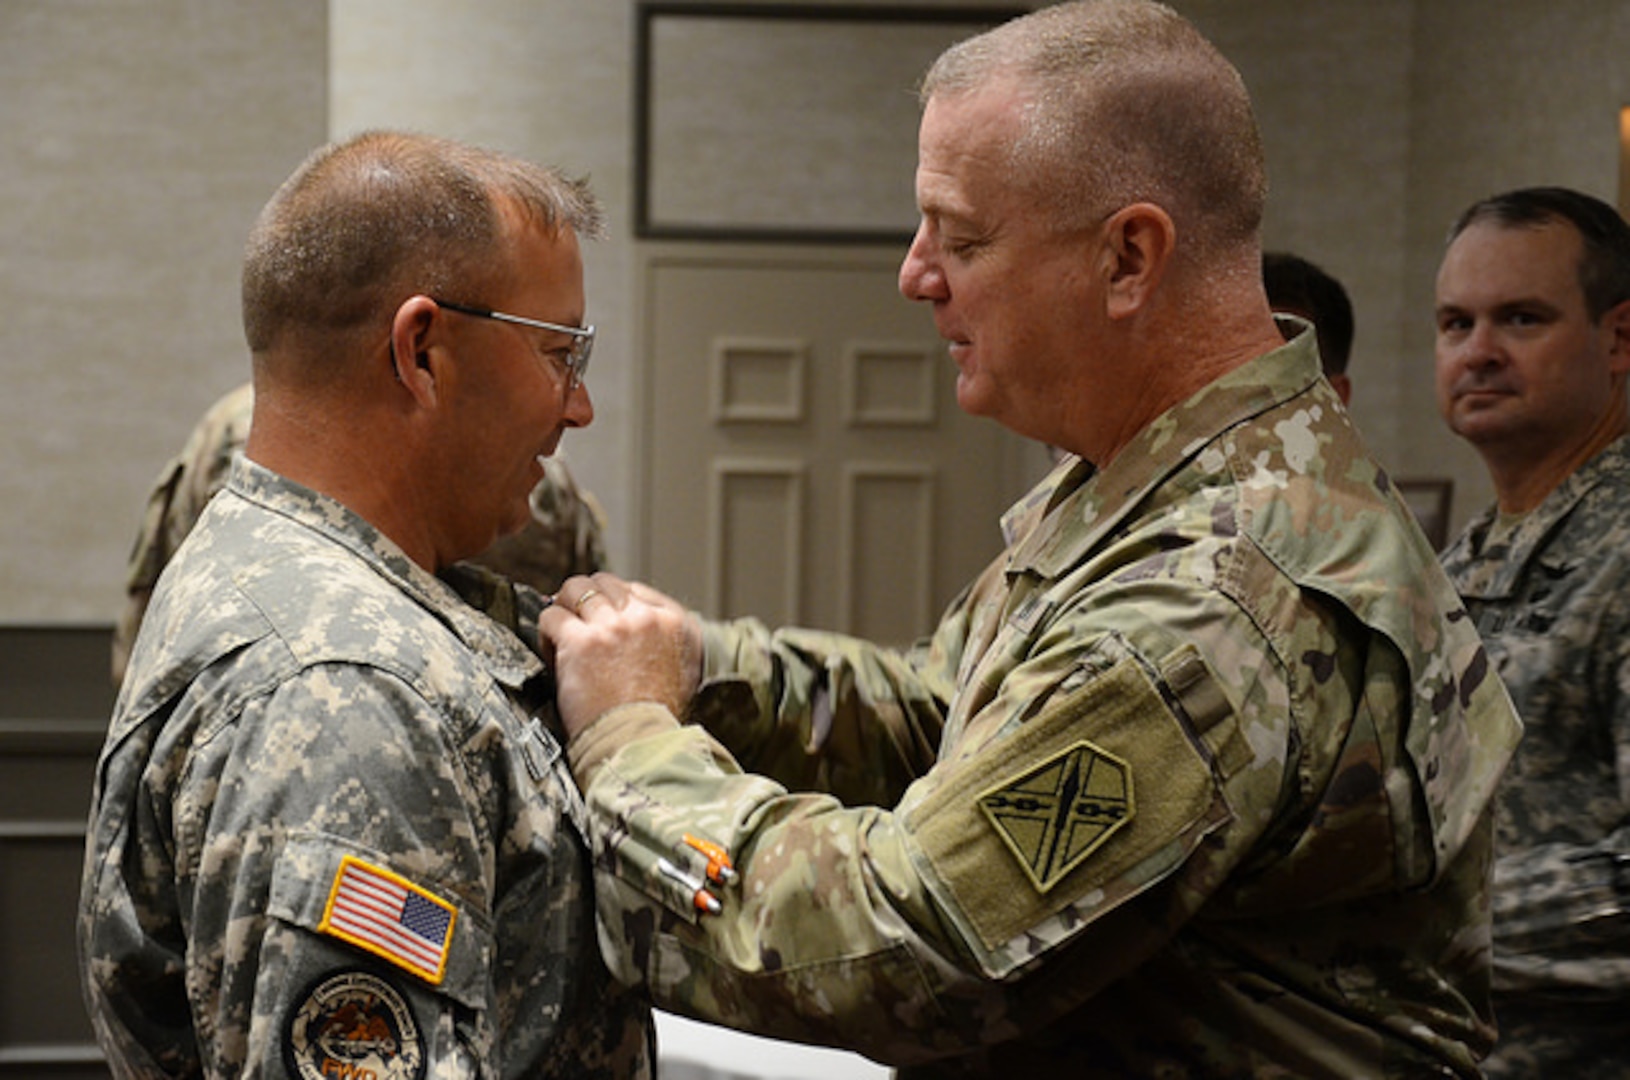 Aviation troops recognized for overseas service